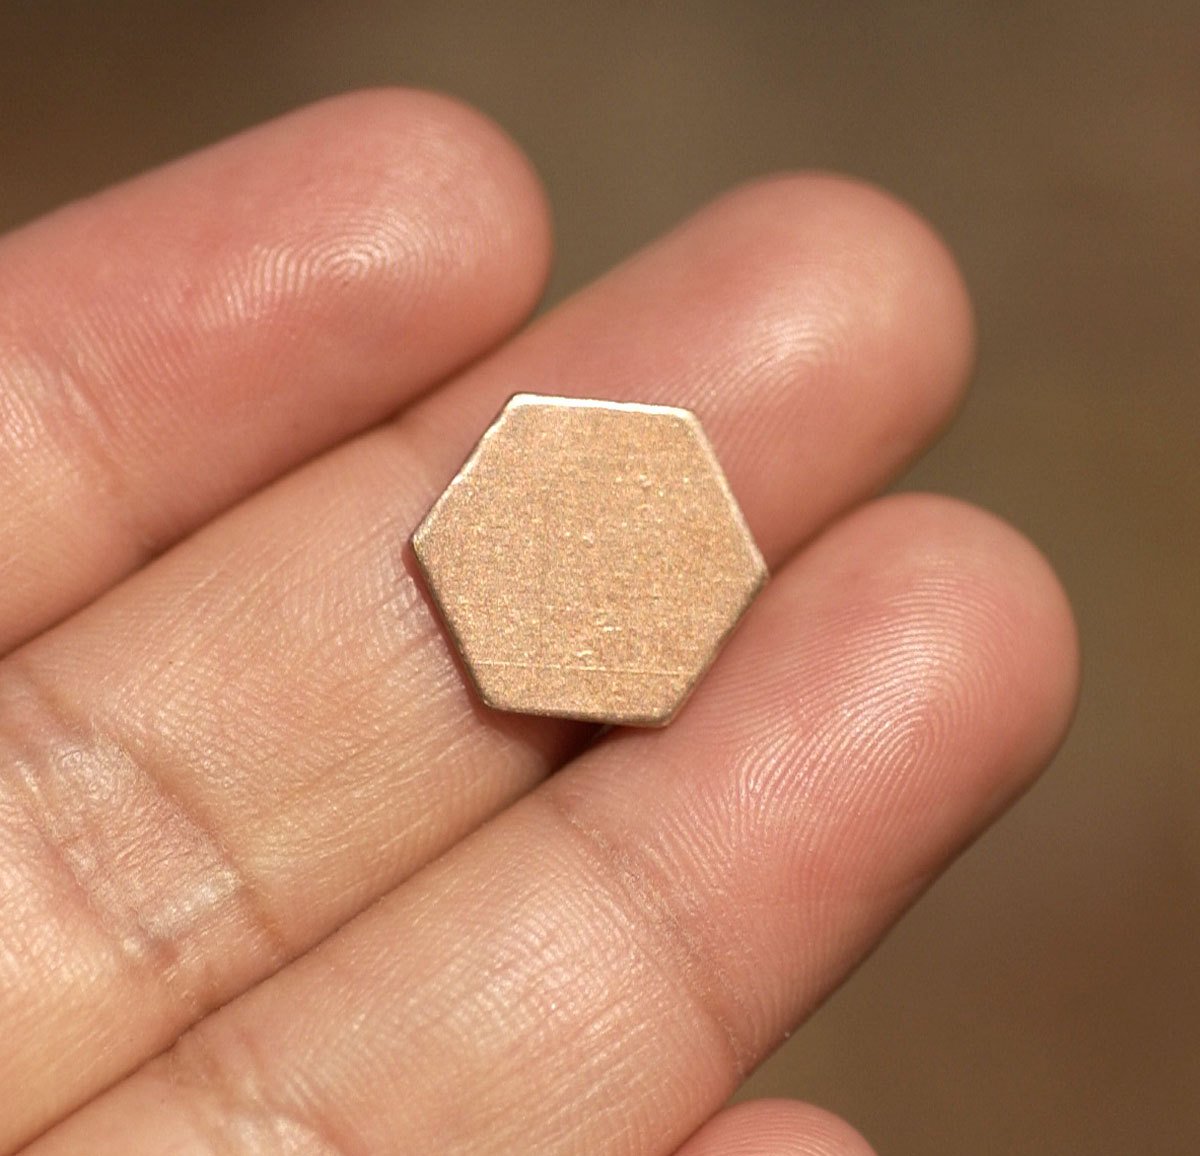 Hexagon 20g 12mm Blanks Cutout for Enameling Stamping Texturing Soldering Metalworking Blank - 6 pieces